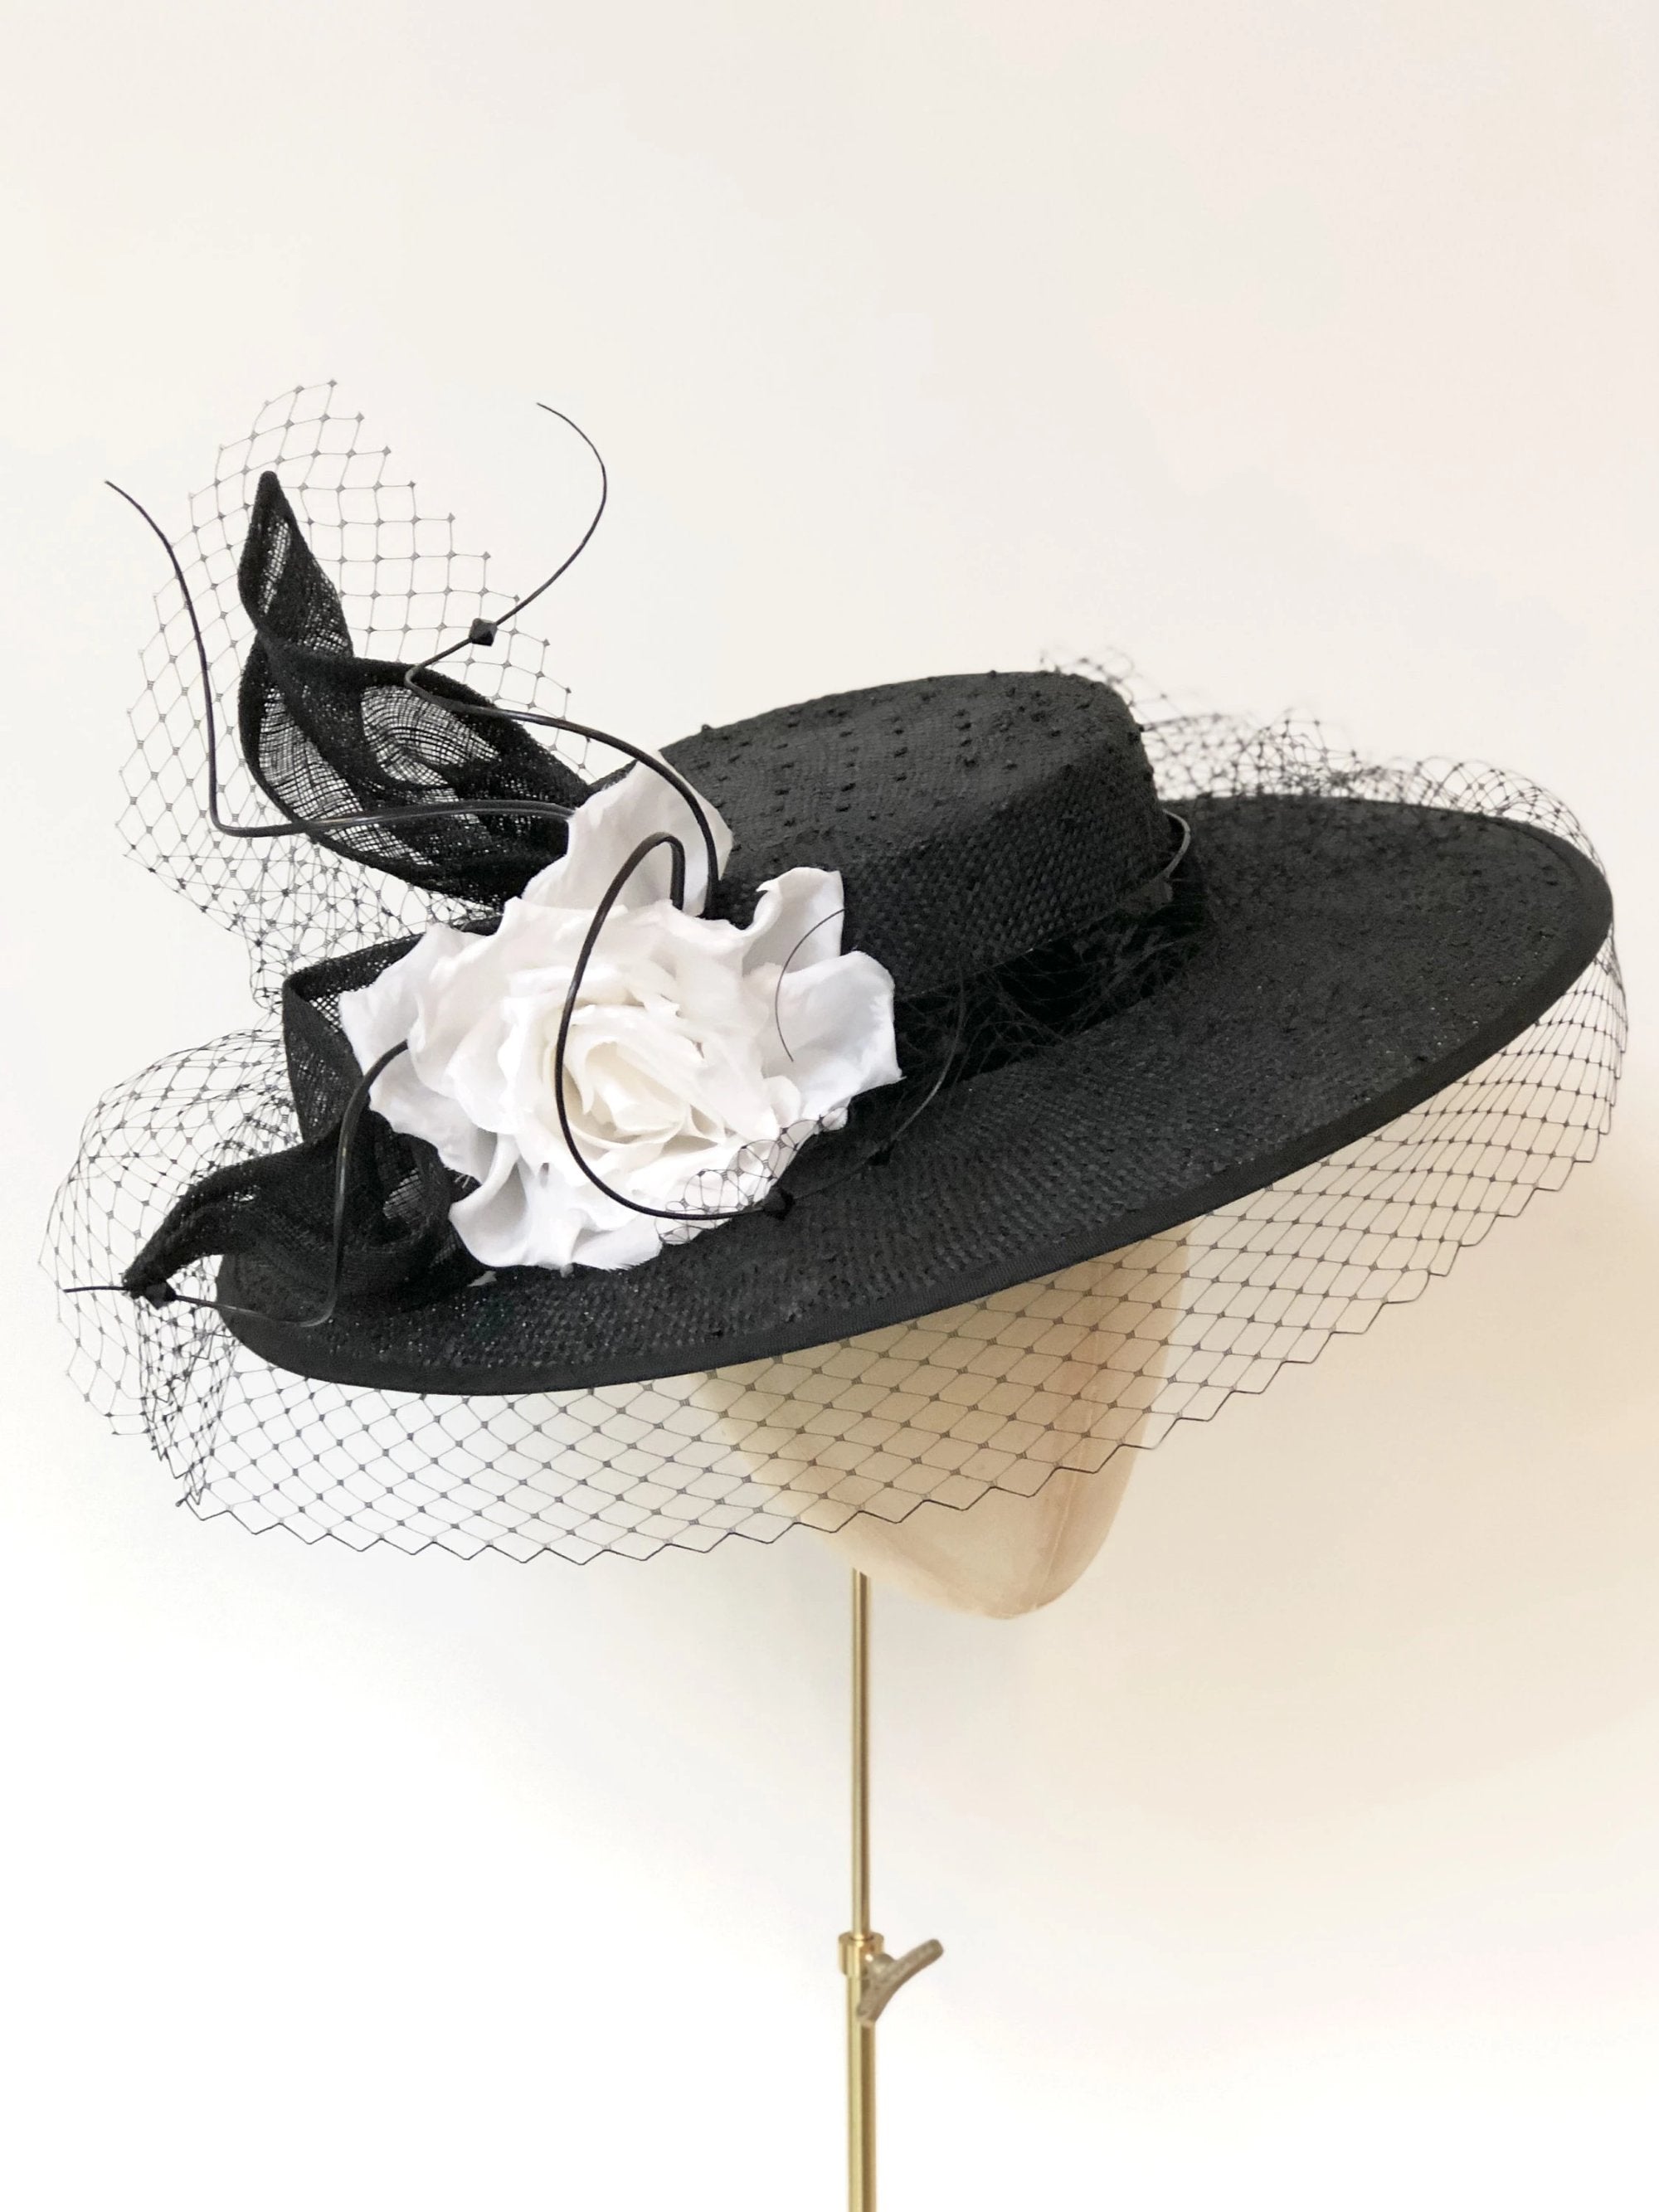 black knotted straw wide boater hat for ladies, royal ascot races, with white silk flower starw sinamy twist, black quills and black veiling